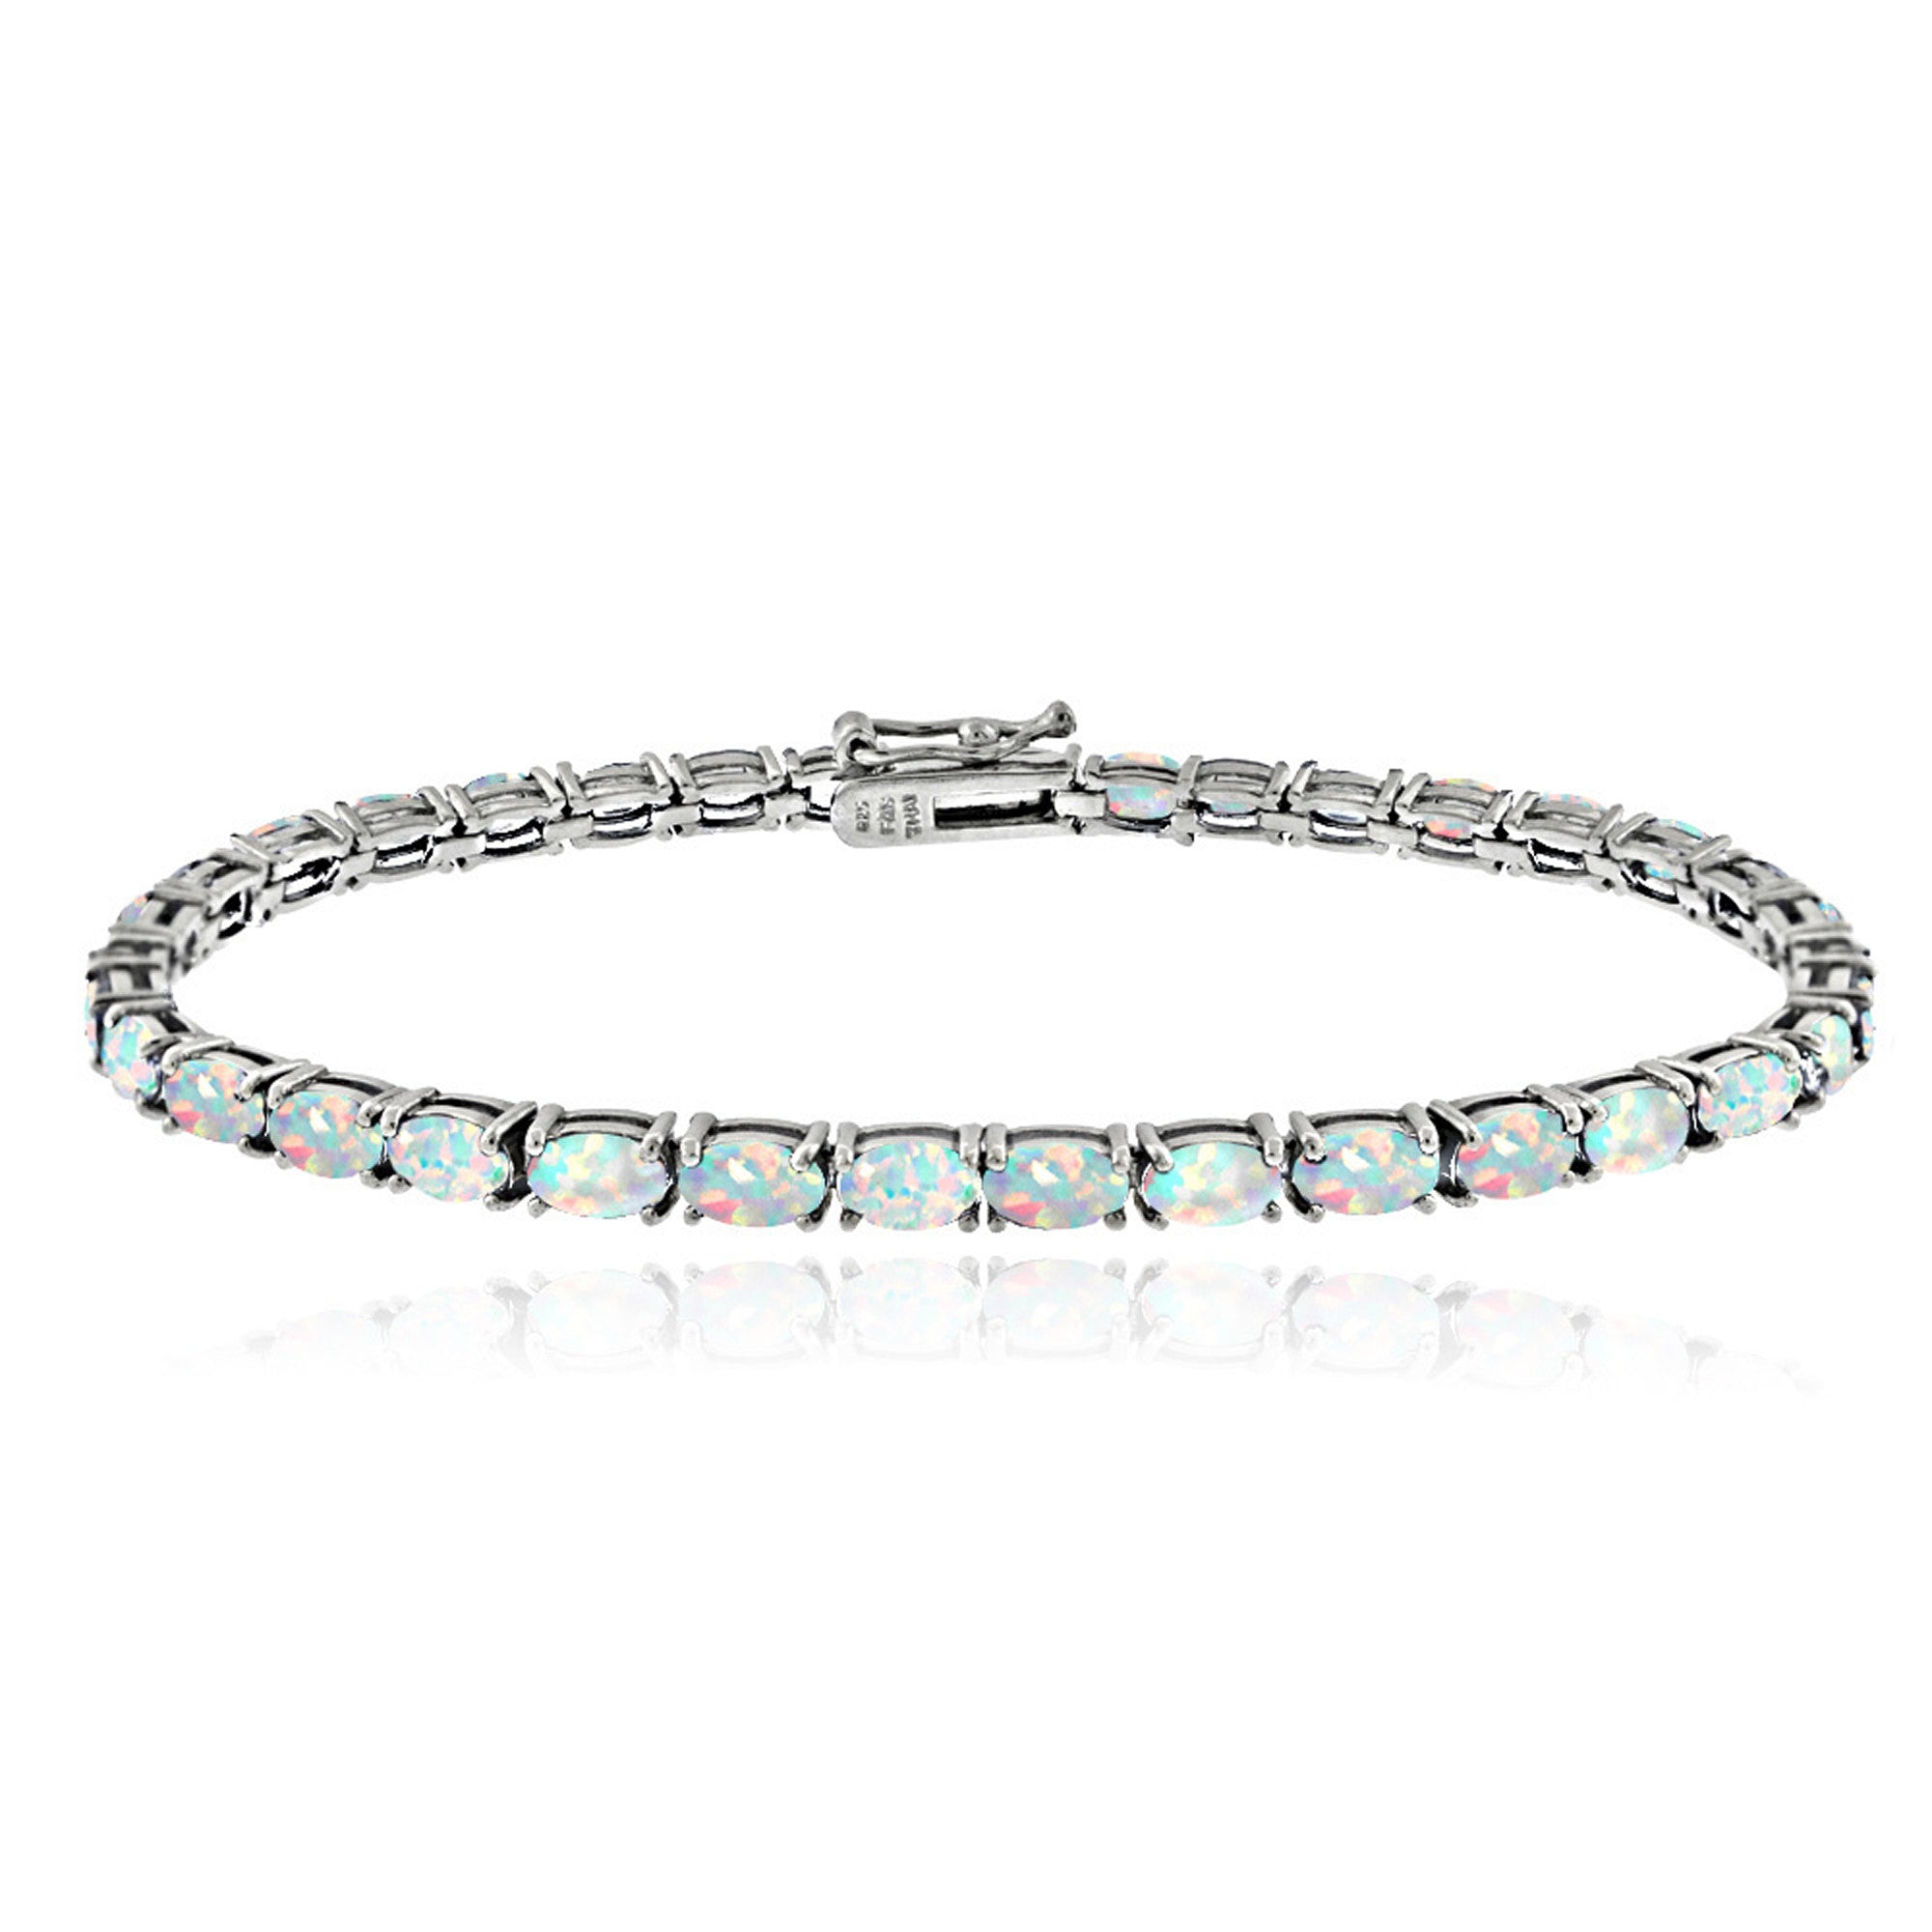 Birthstone Tennis Bracelet With CZ & Gem Accents in Sterling Silver - October Opal